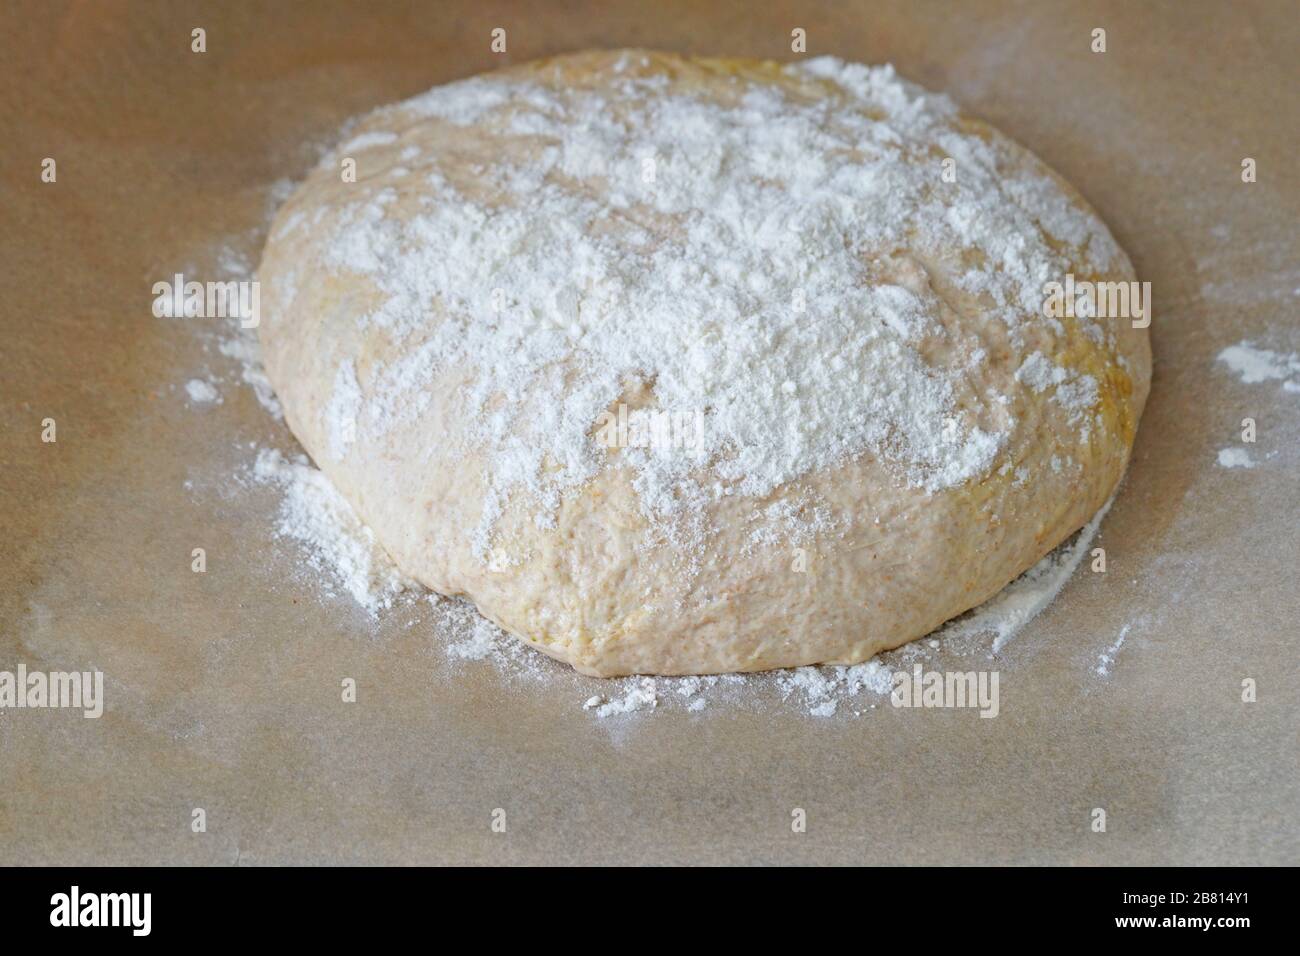 Making a floured bread loaf with proofed yeast dough on parchment paper Stock Photo